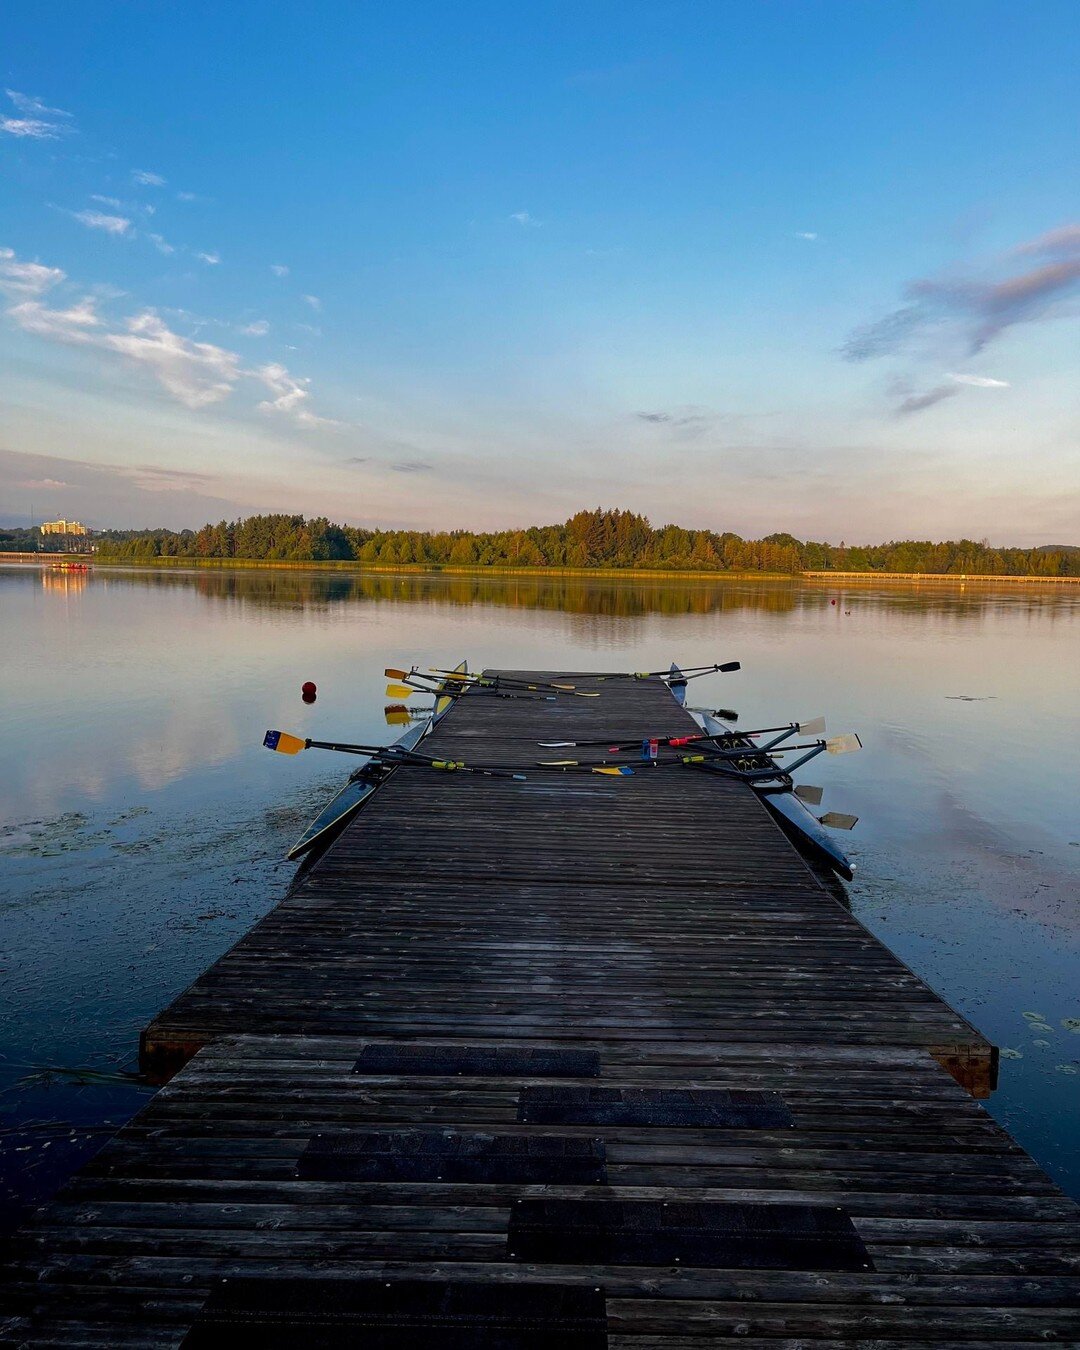 Ready to launch onto a perfect morning row